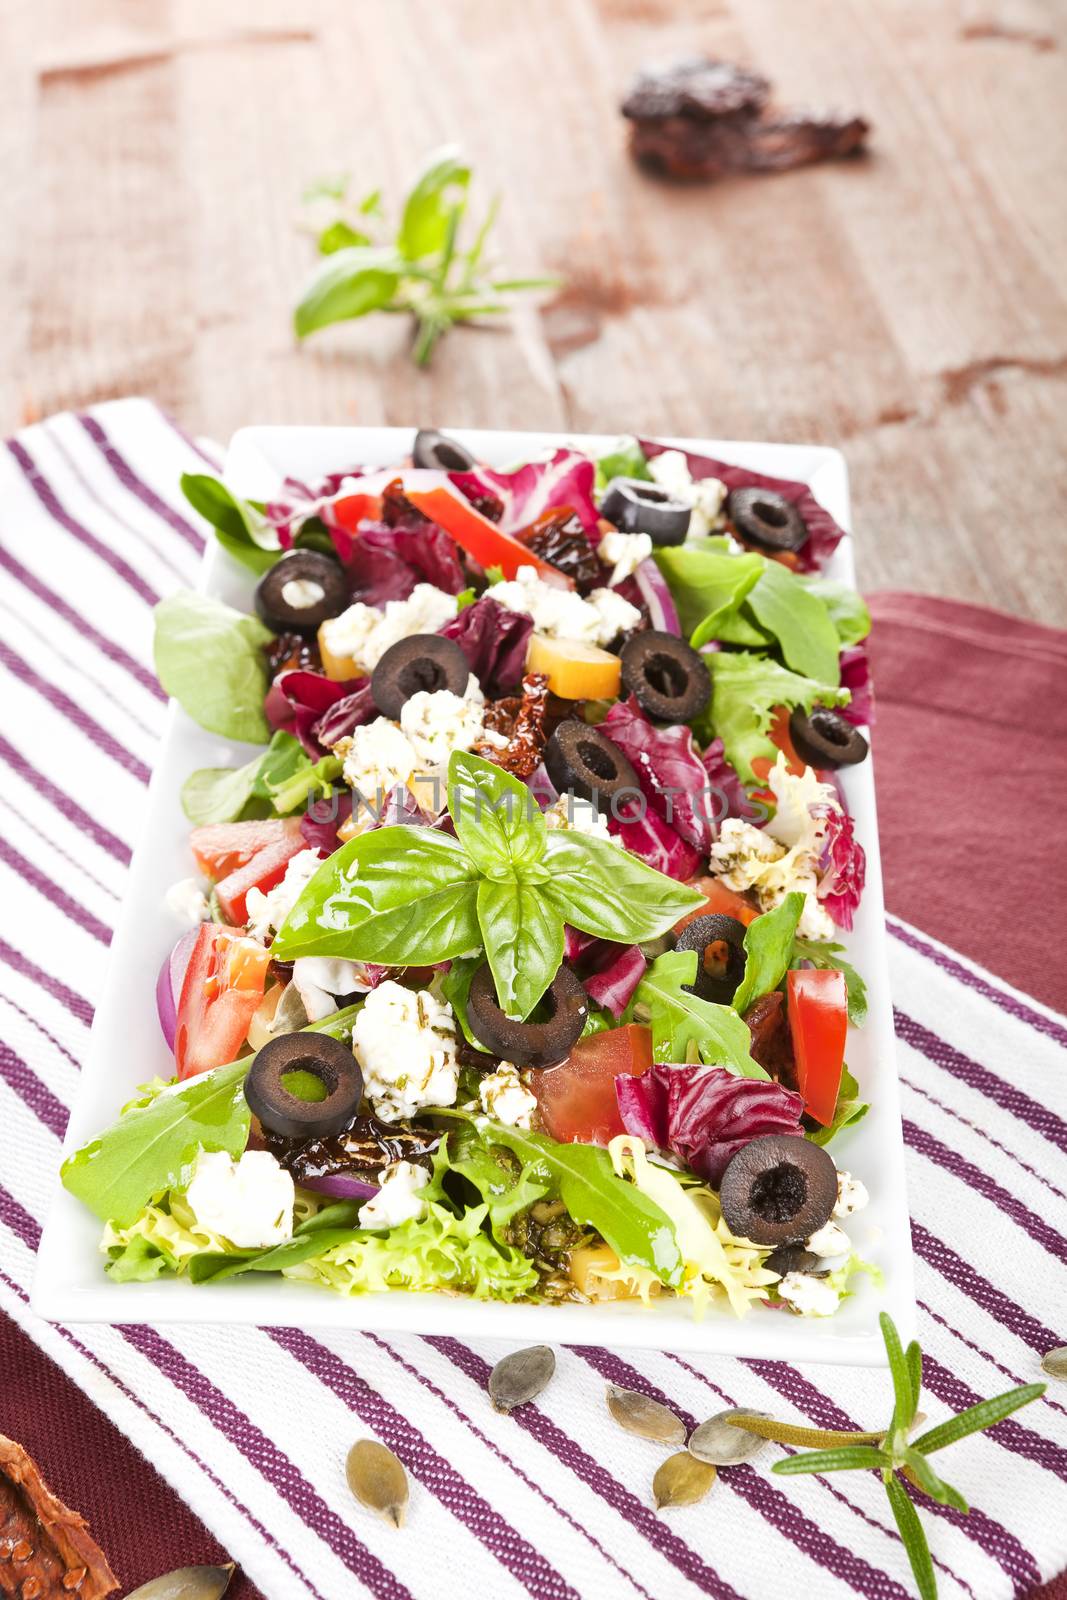 Tasty summer salad with fresh ingredients and herbs on kitchen towel on dark wooden table. 